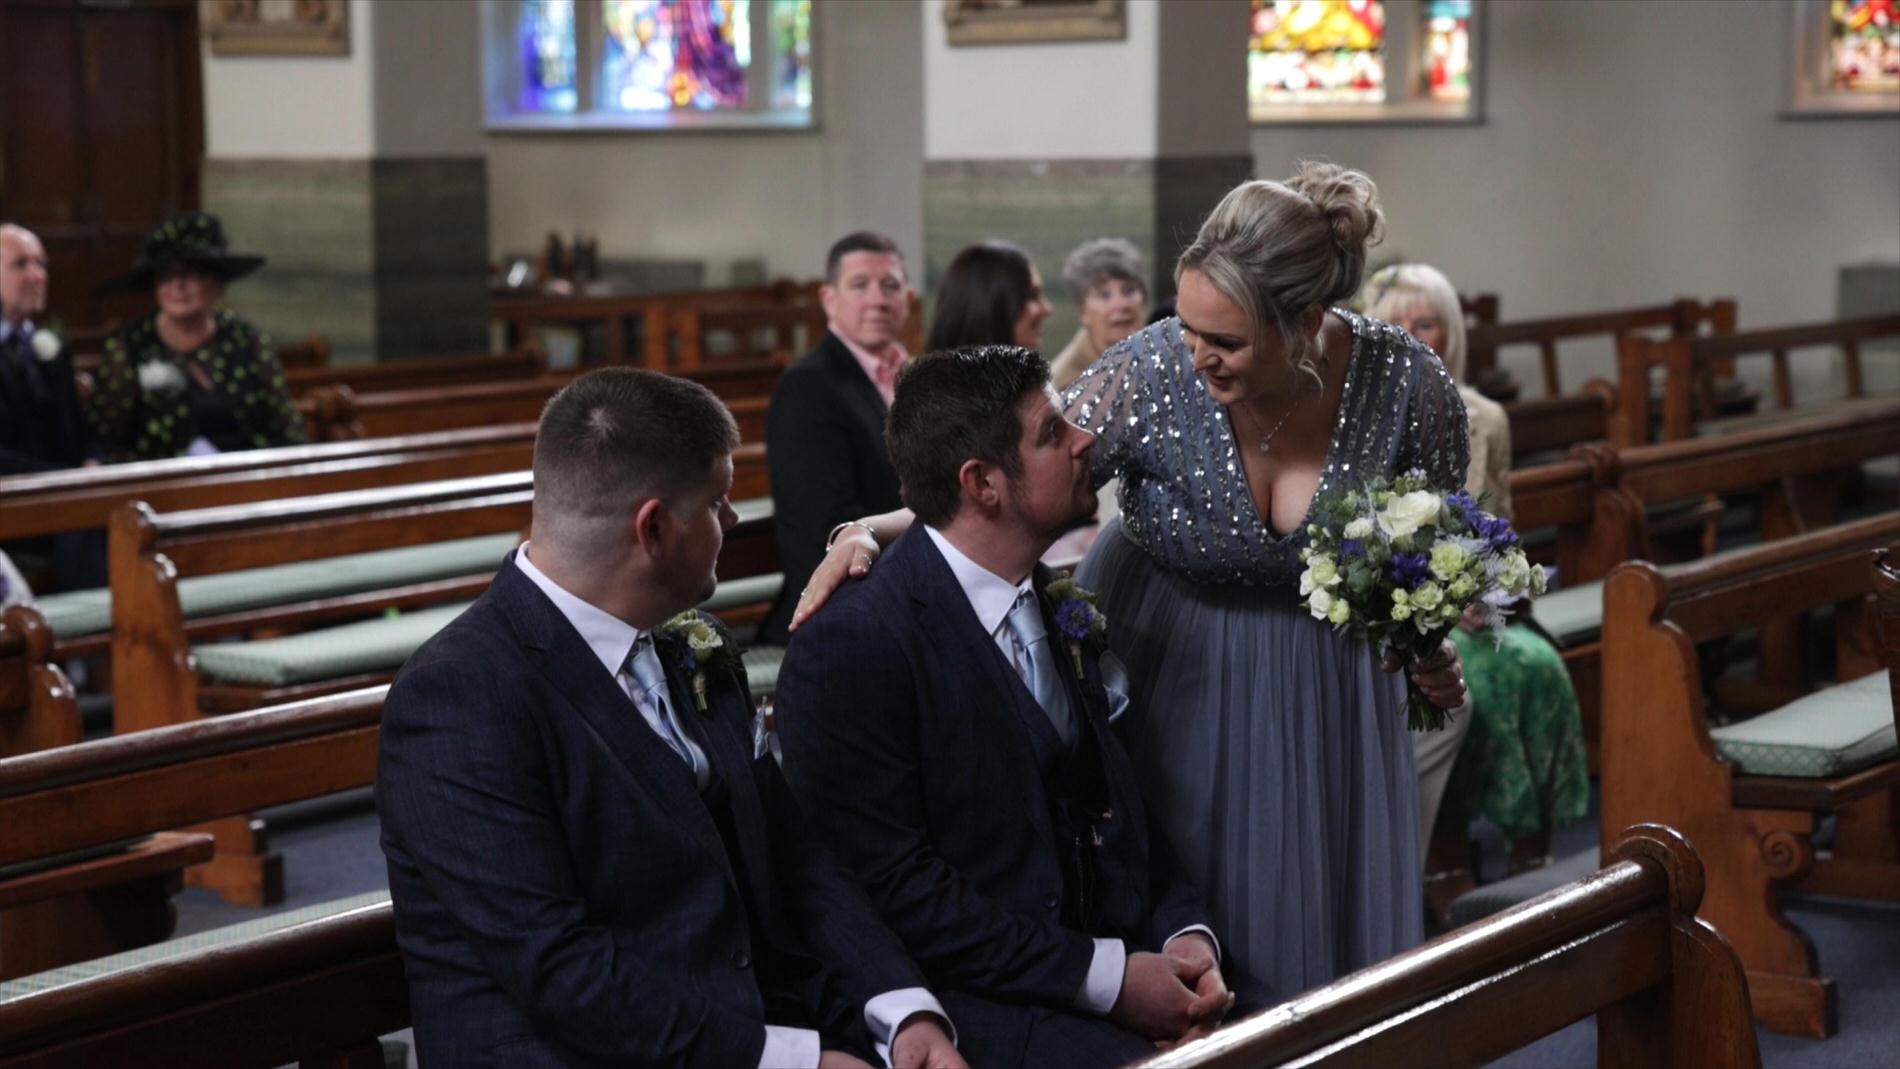 a bridesmaid smiles at the Groom in church